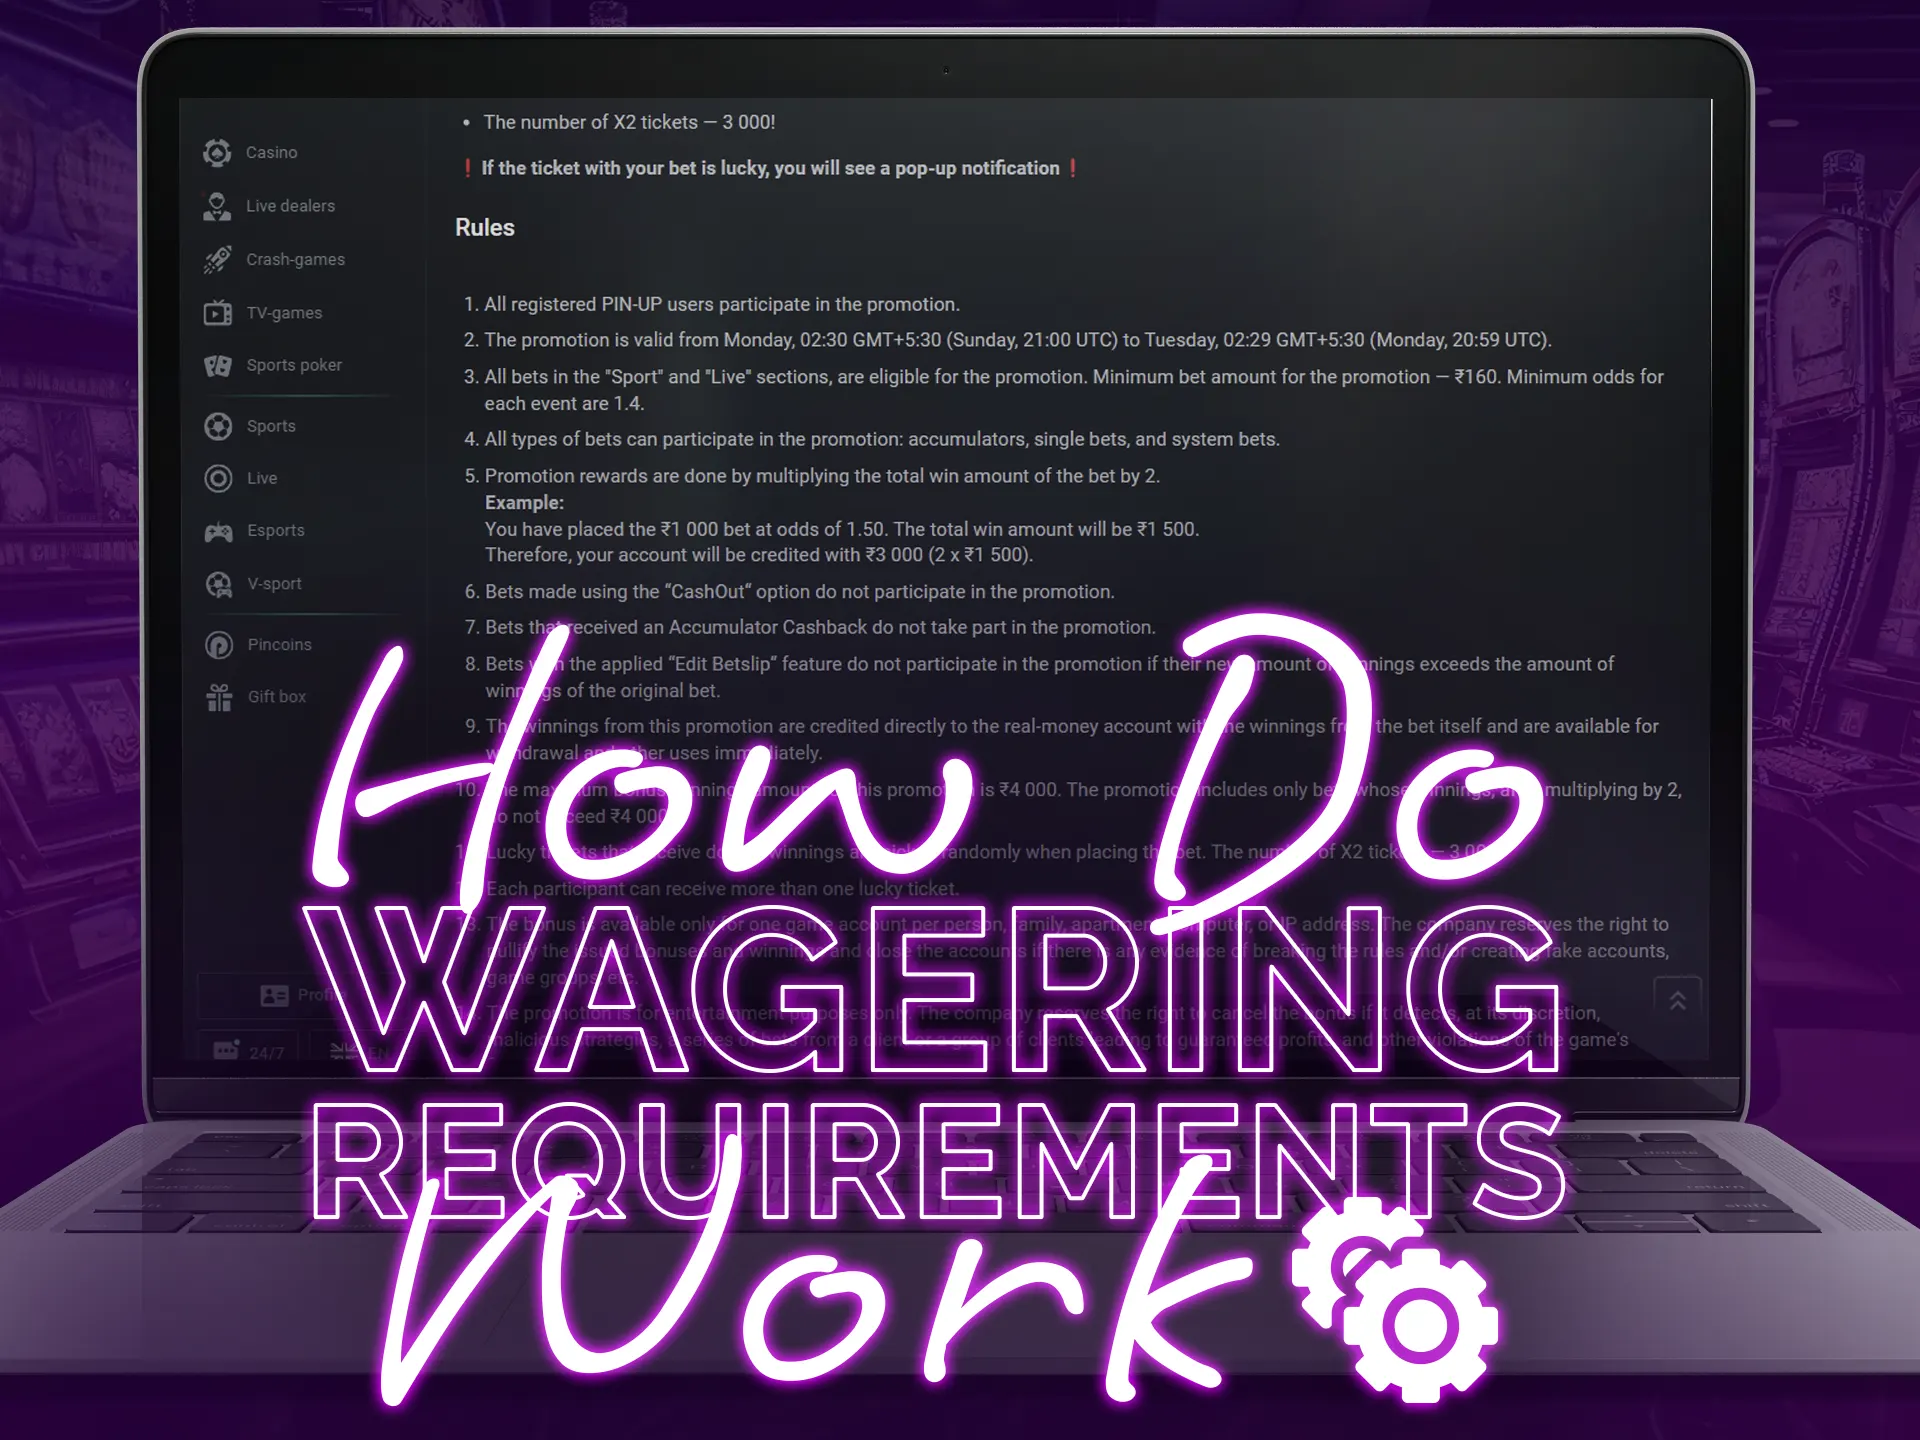 Wagering requirements dictate bonus use and withdrawal conditions in online casinos.